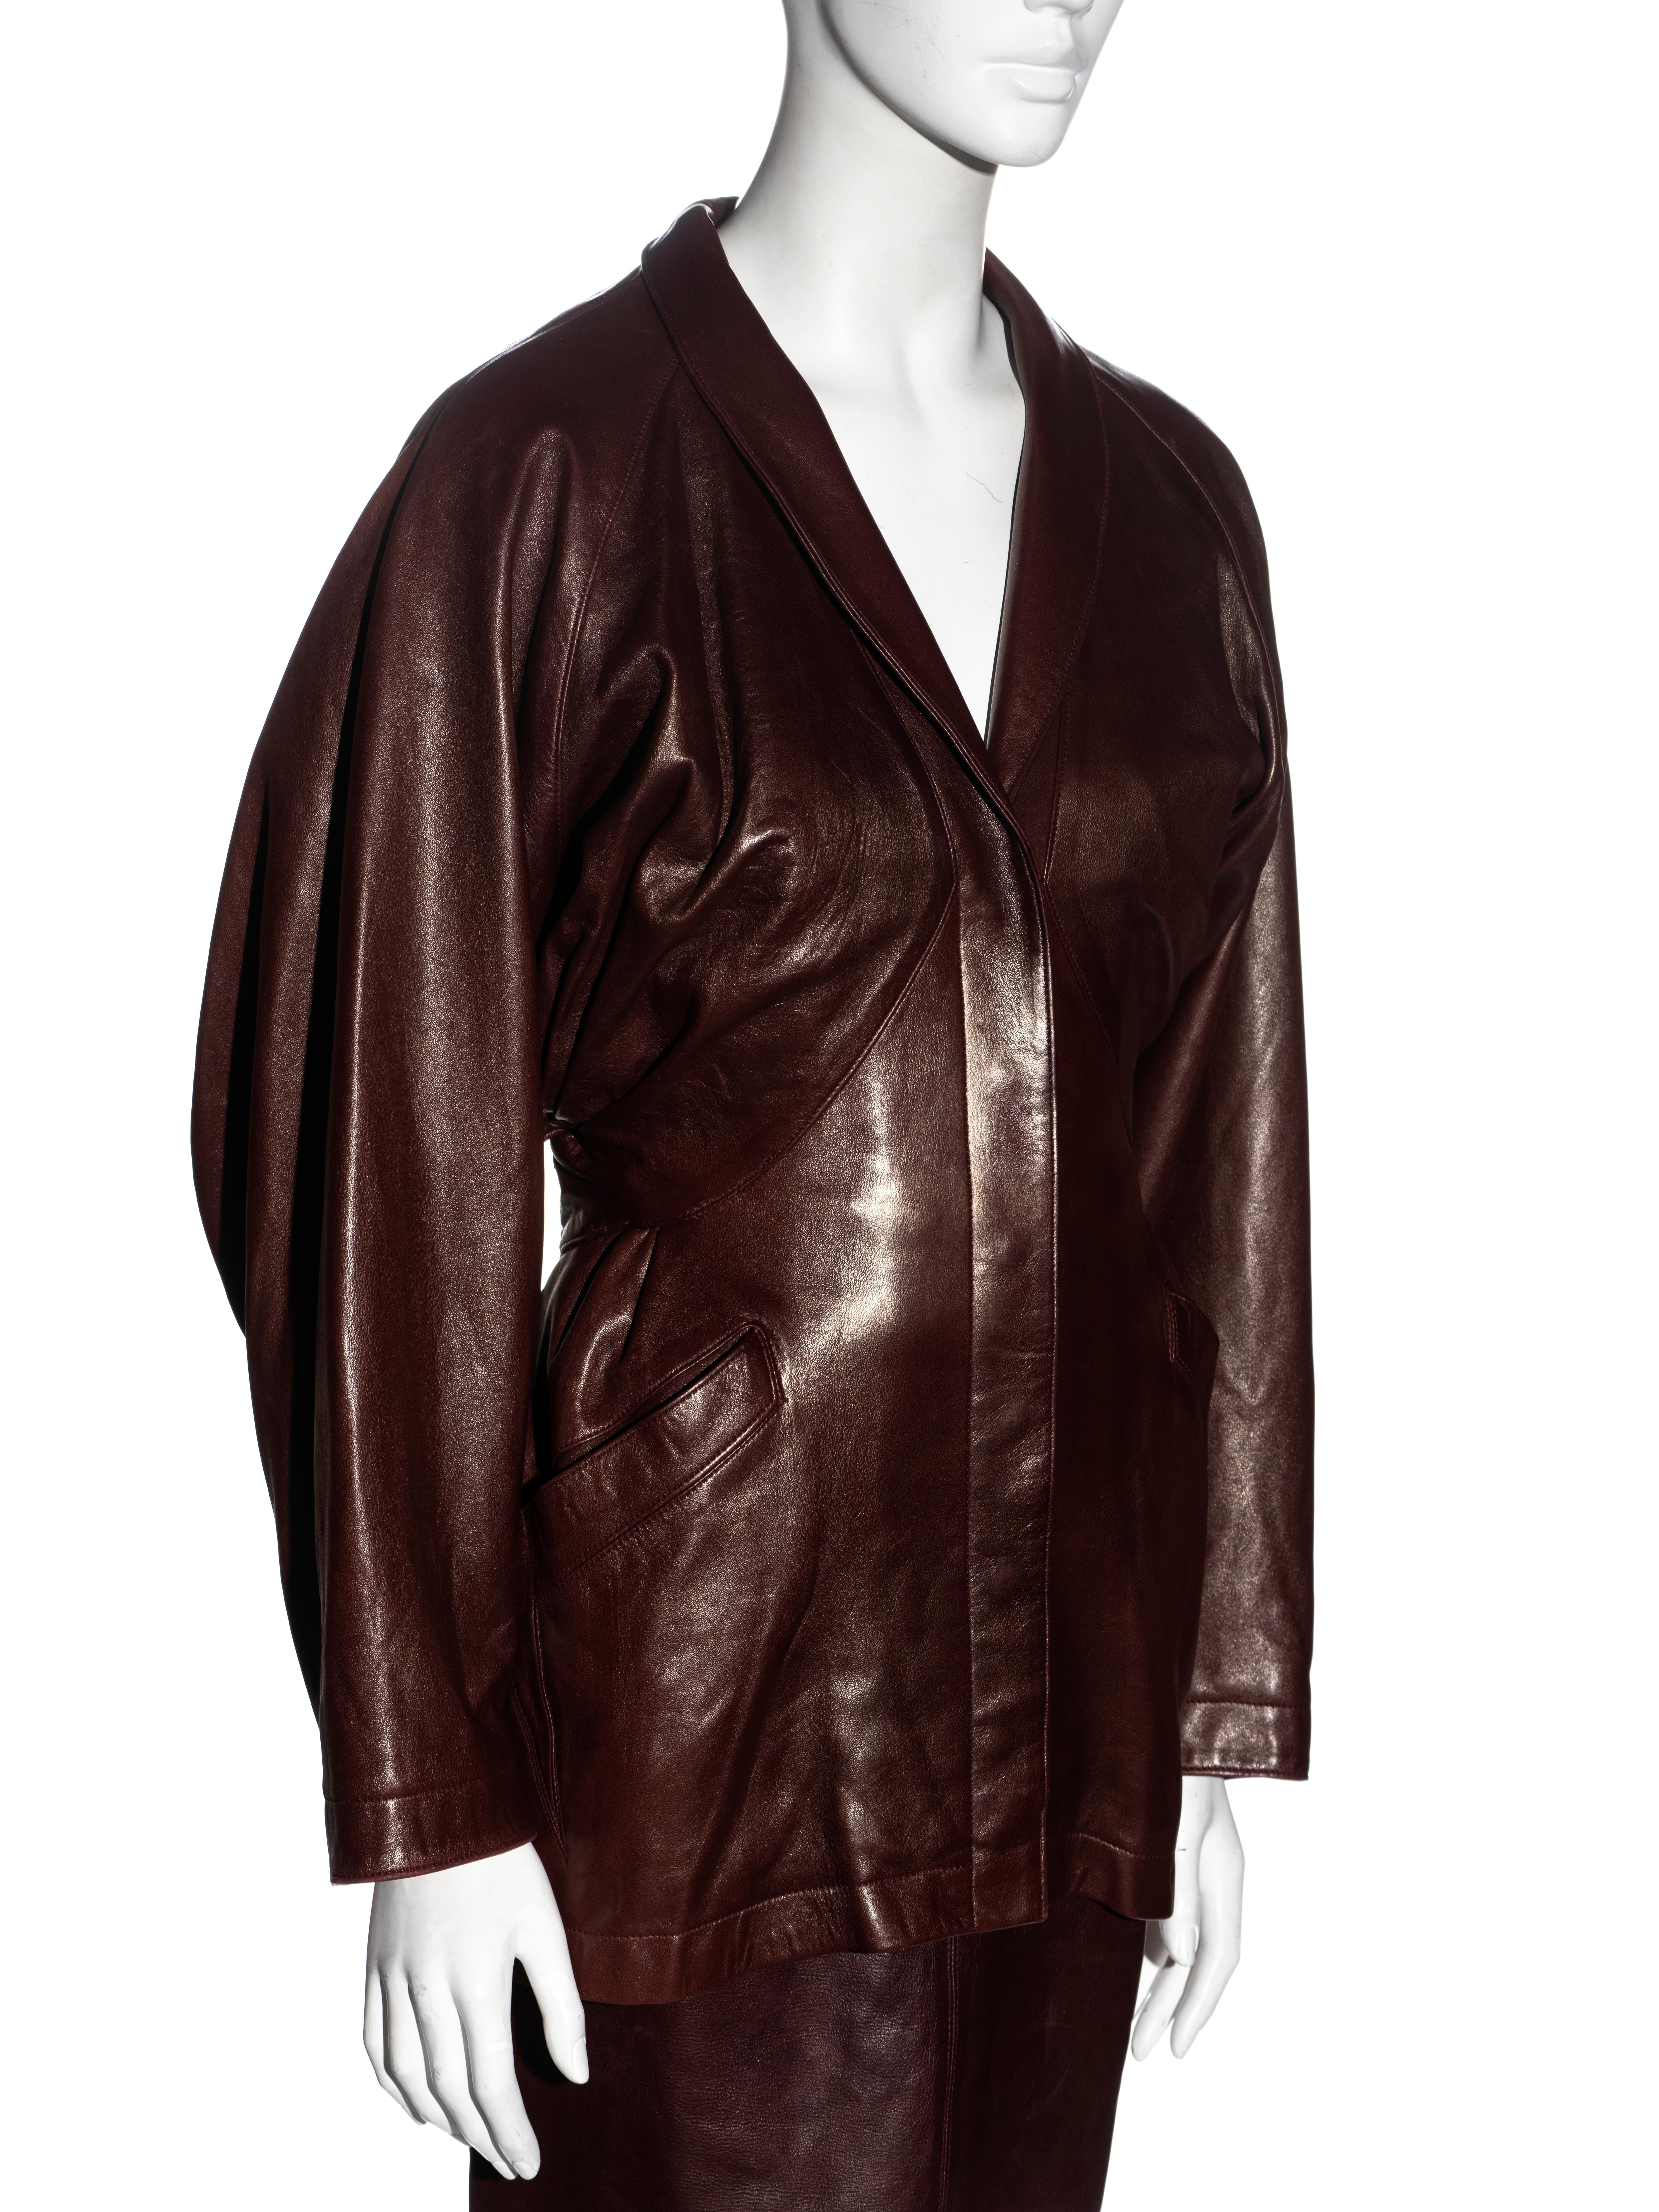 Black Azzedine Alaia brown leather jacket and skirt suit, fw 1984